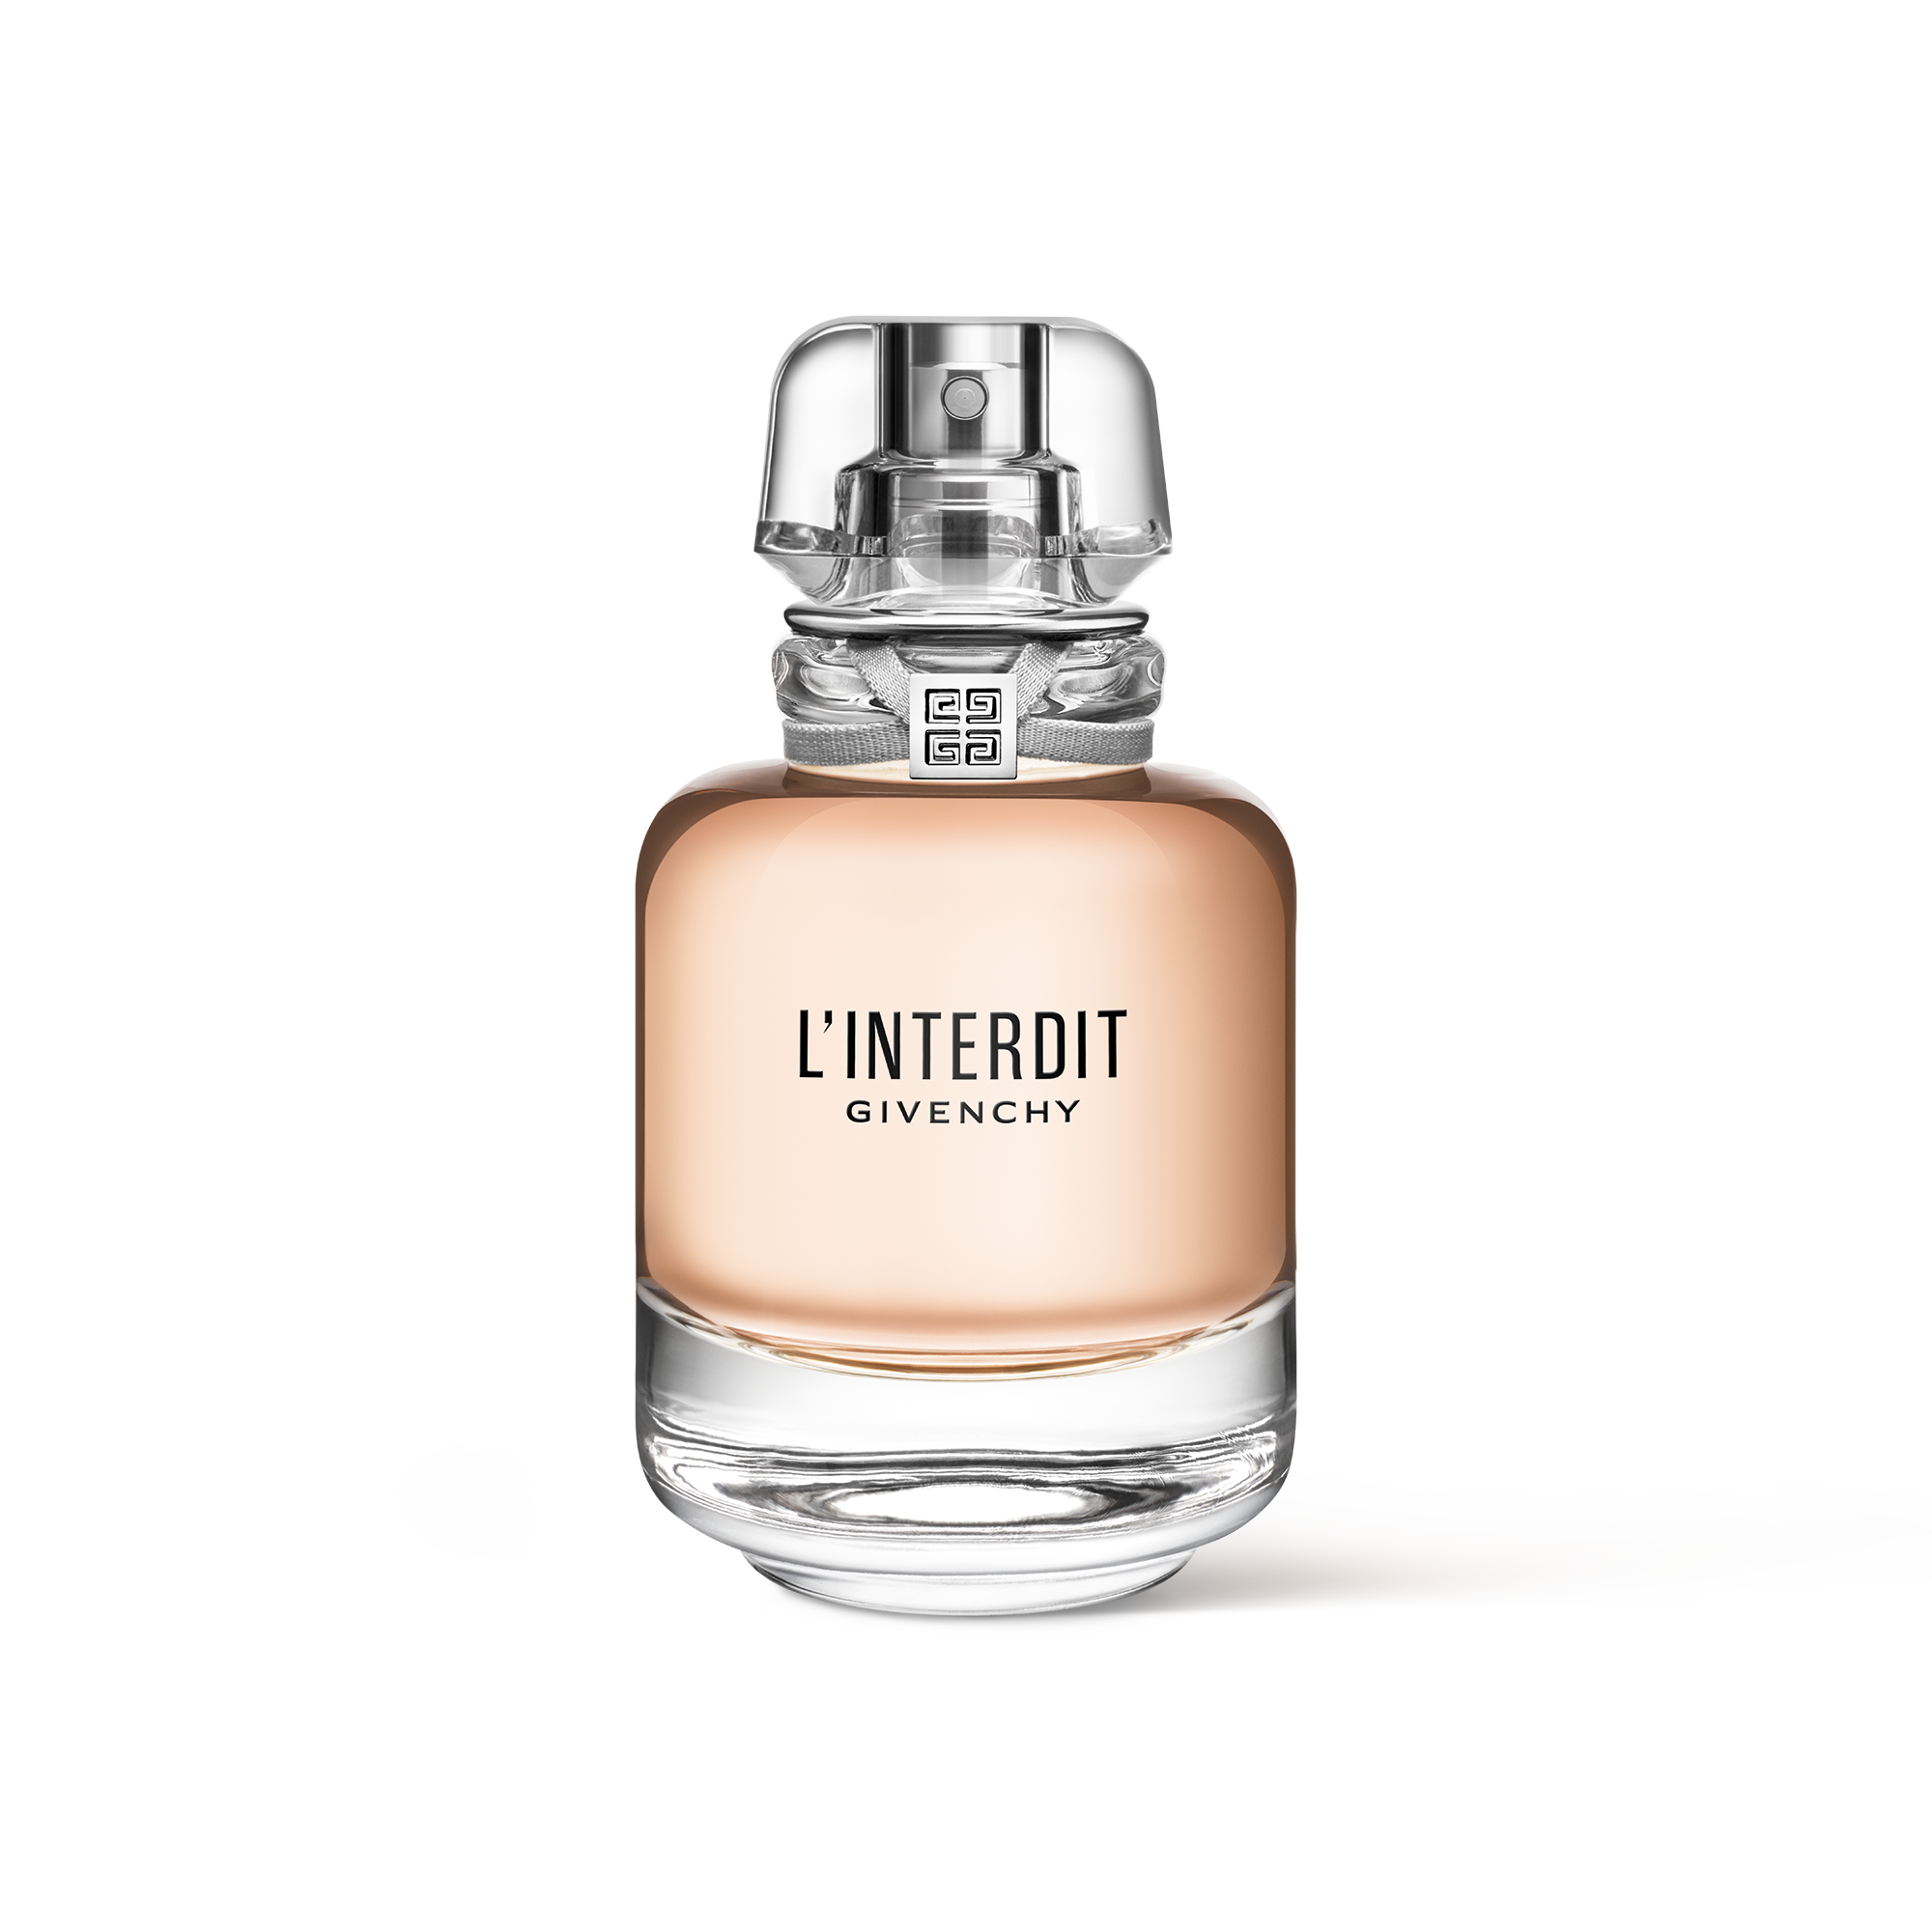 Perfume for Women ∷ GIVENCHY